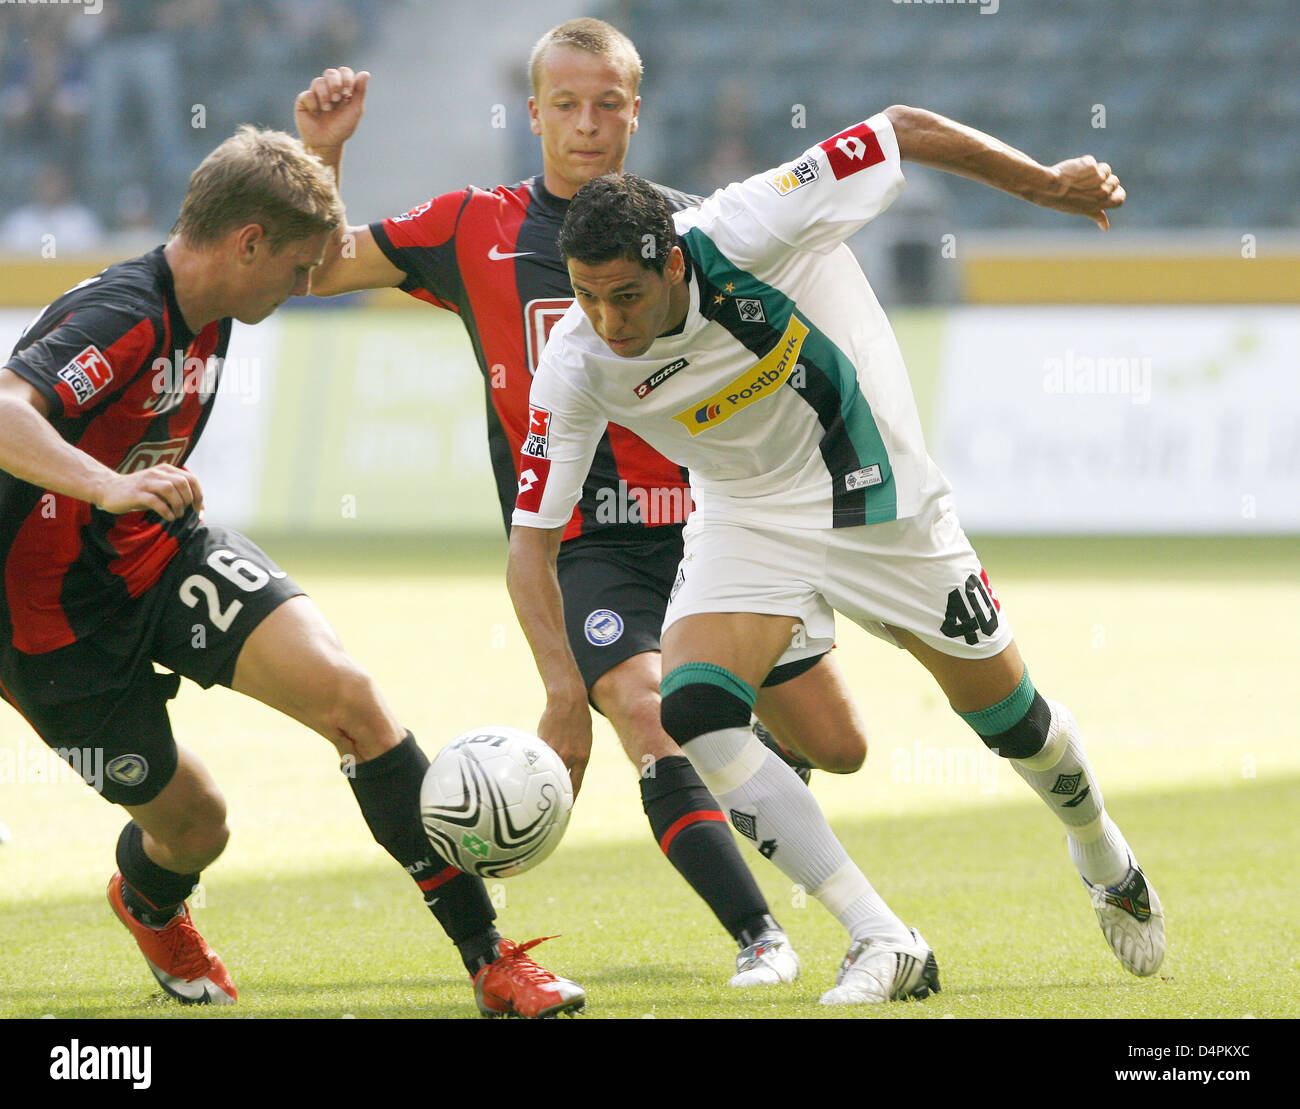 Moenchengladbach?s Karim Matmour (R) fights for the ball with Berlin?s Lukasz Piszczek (L) and Patrick Ebert (C) during the German Bundesliga match Borussia Moenchengladbach vs Hertha BSC Berlin at Borussia Park stadium in Moenchengladbach, Germany, 16 August 2009. Photo: ROLAND WEIHRAUCH (ATTENTION: EMBARGO CONDITIONS! The DFL permits the further utilisation of the pictures in IPT Stock Photo